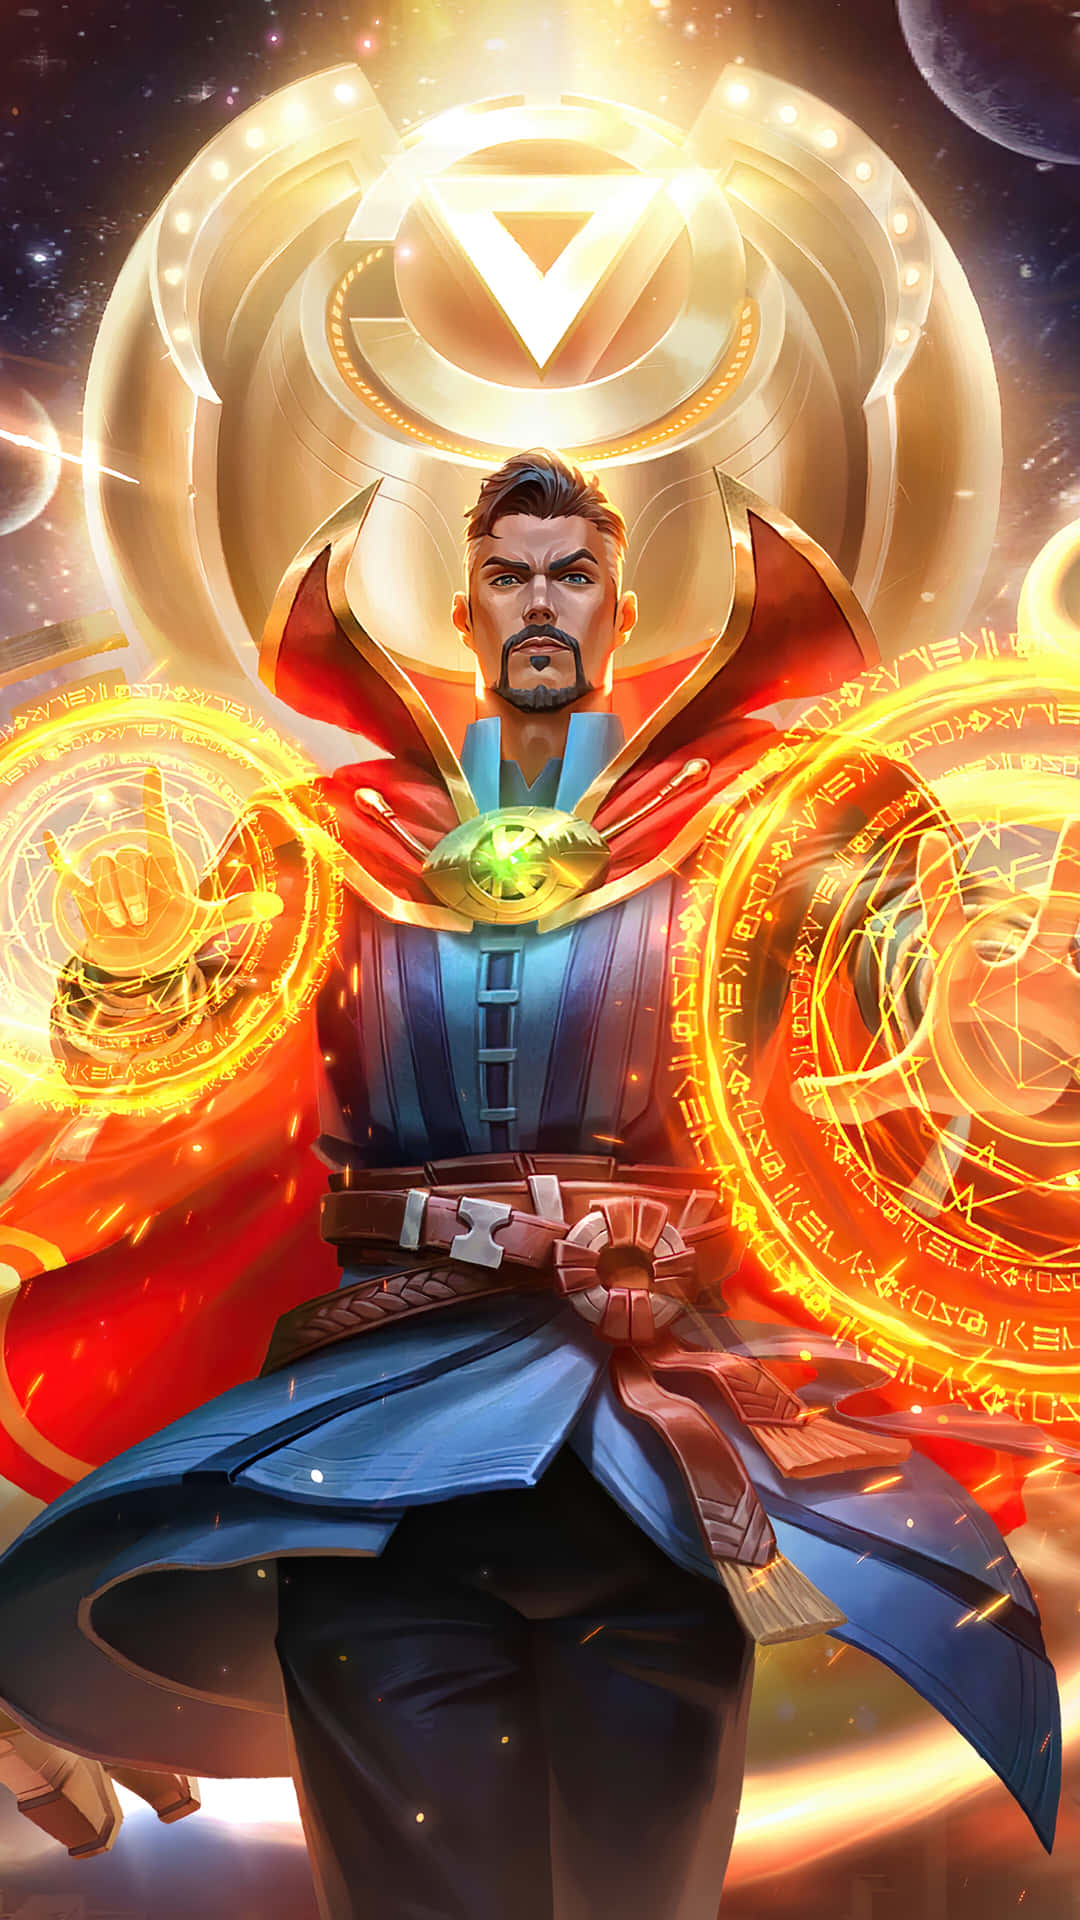 Stephen Strange a.k.a Doctor Strange, useing his supernatural powers to protect the world